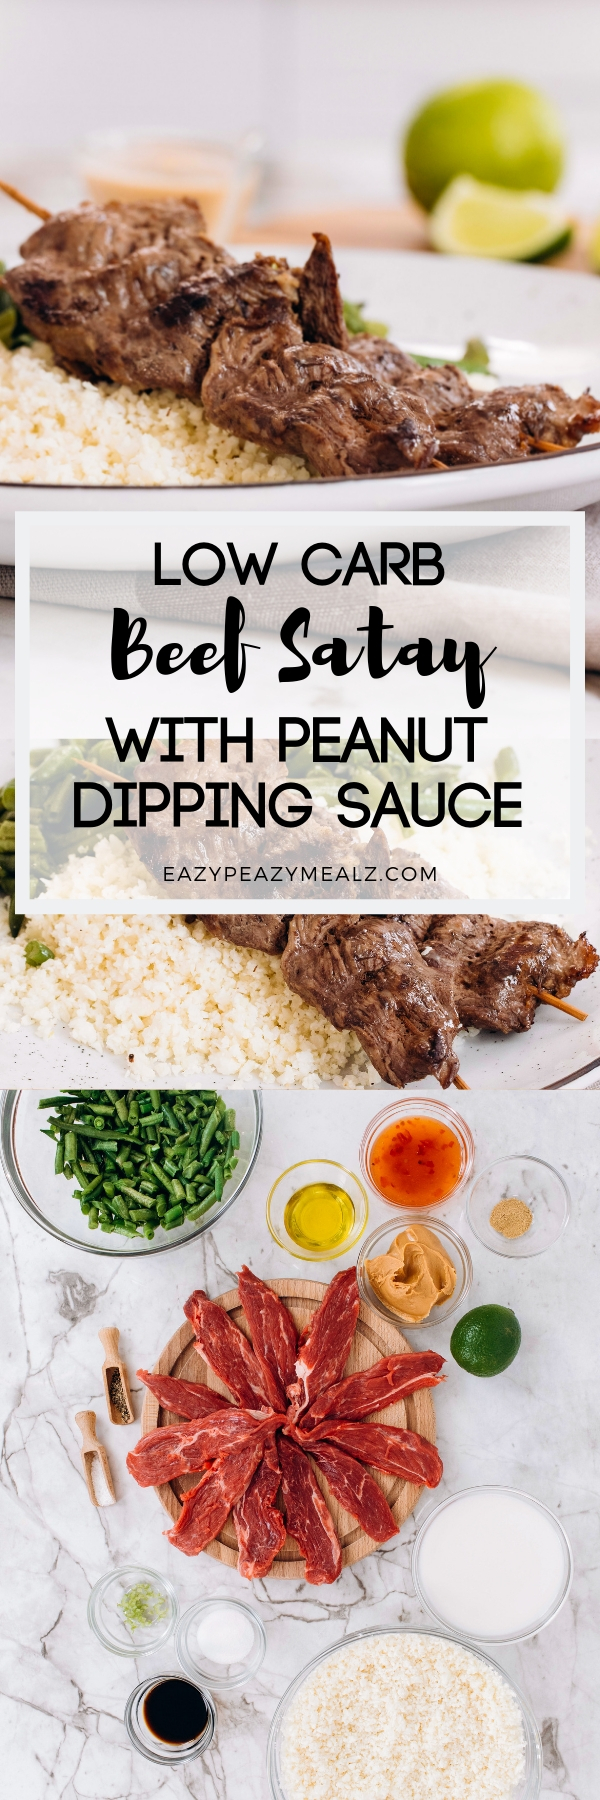 Low carb beef satay with peanut dipping sauce...the perfect keto meal.